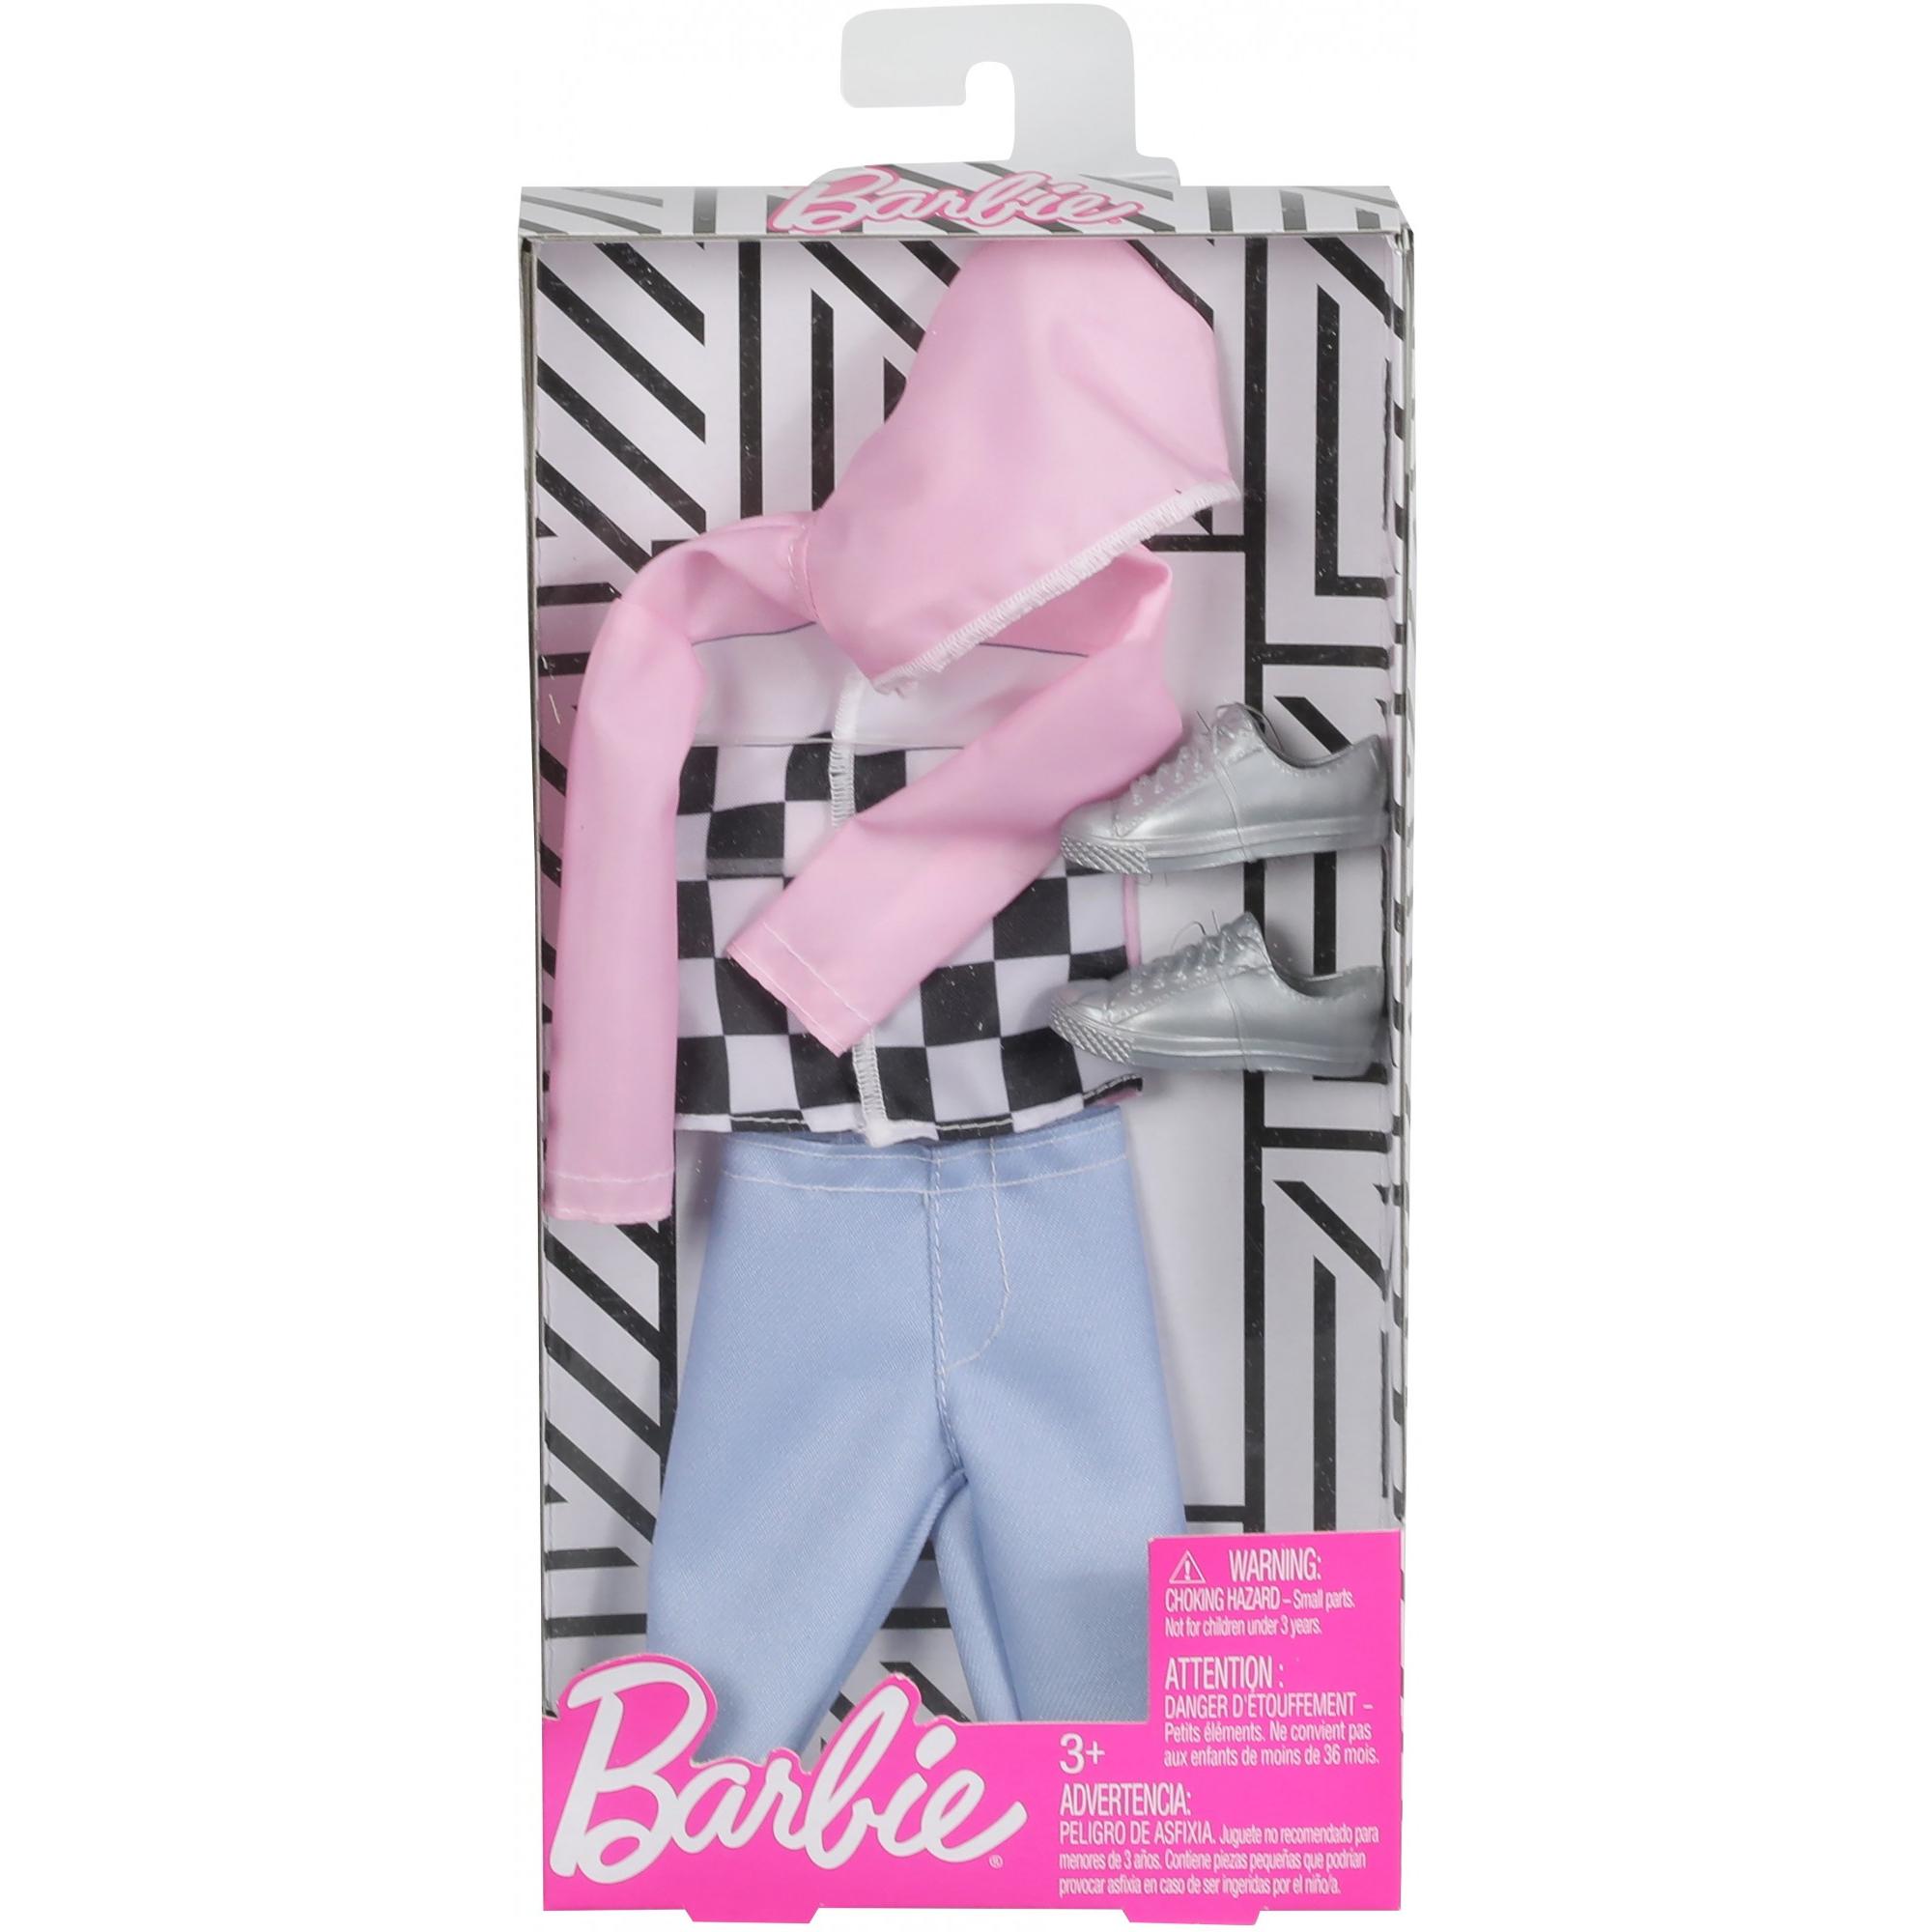 Barbie Ken Fashion, Original Body Type, Checkered Top Outfit - image 2 of 2